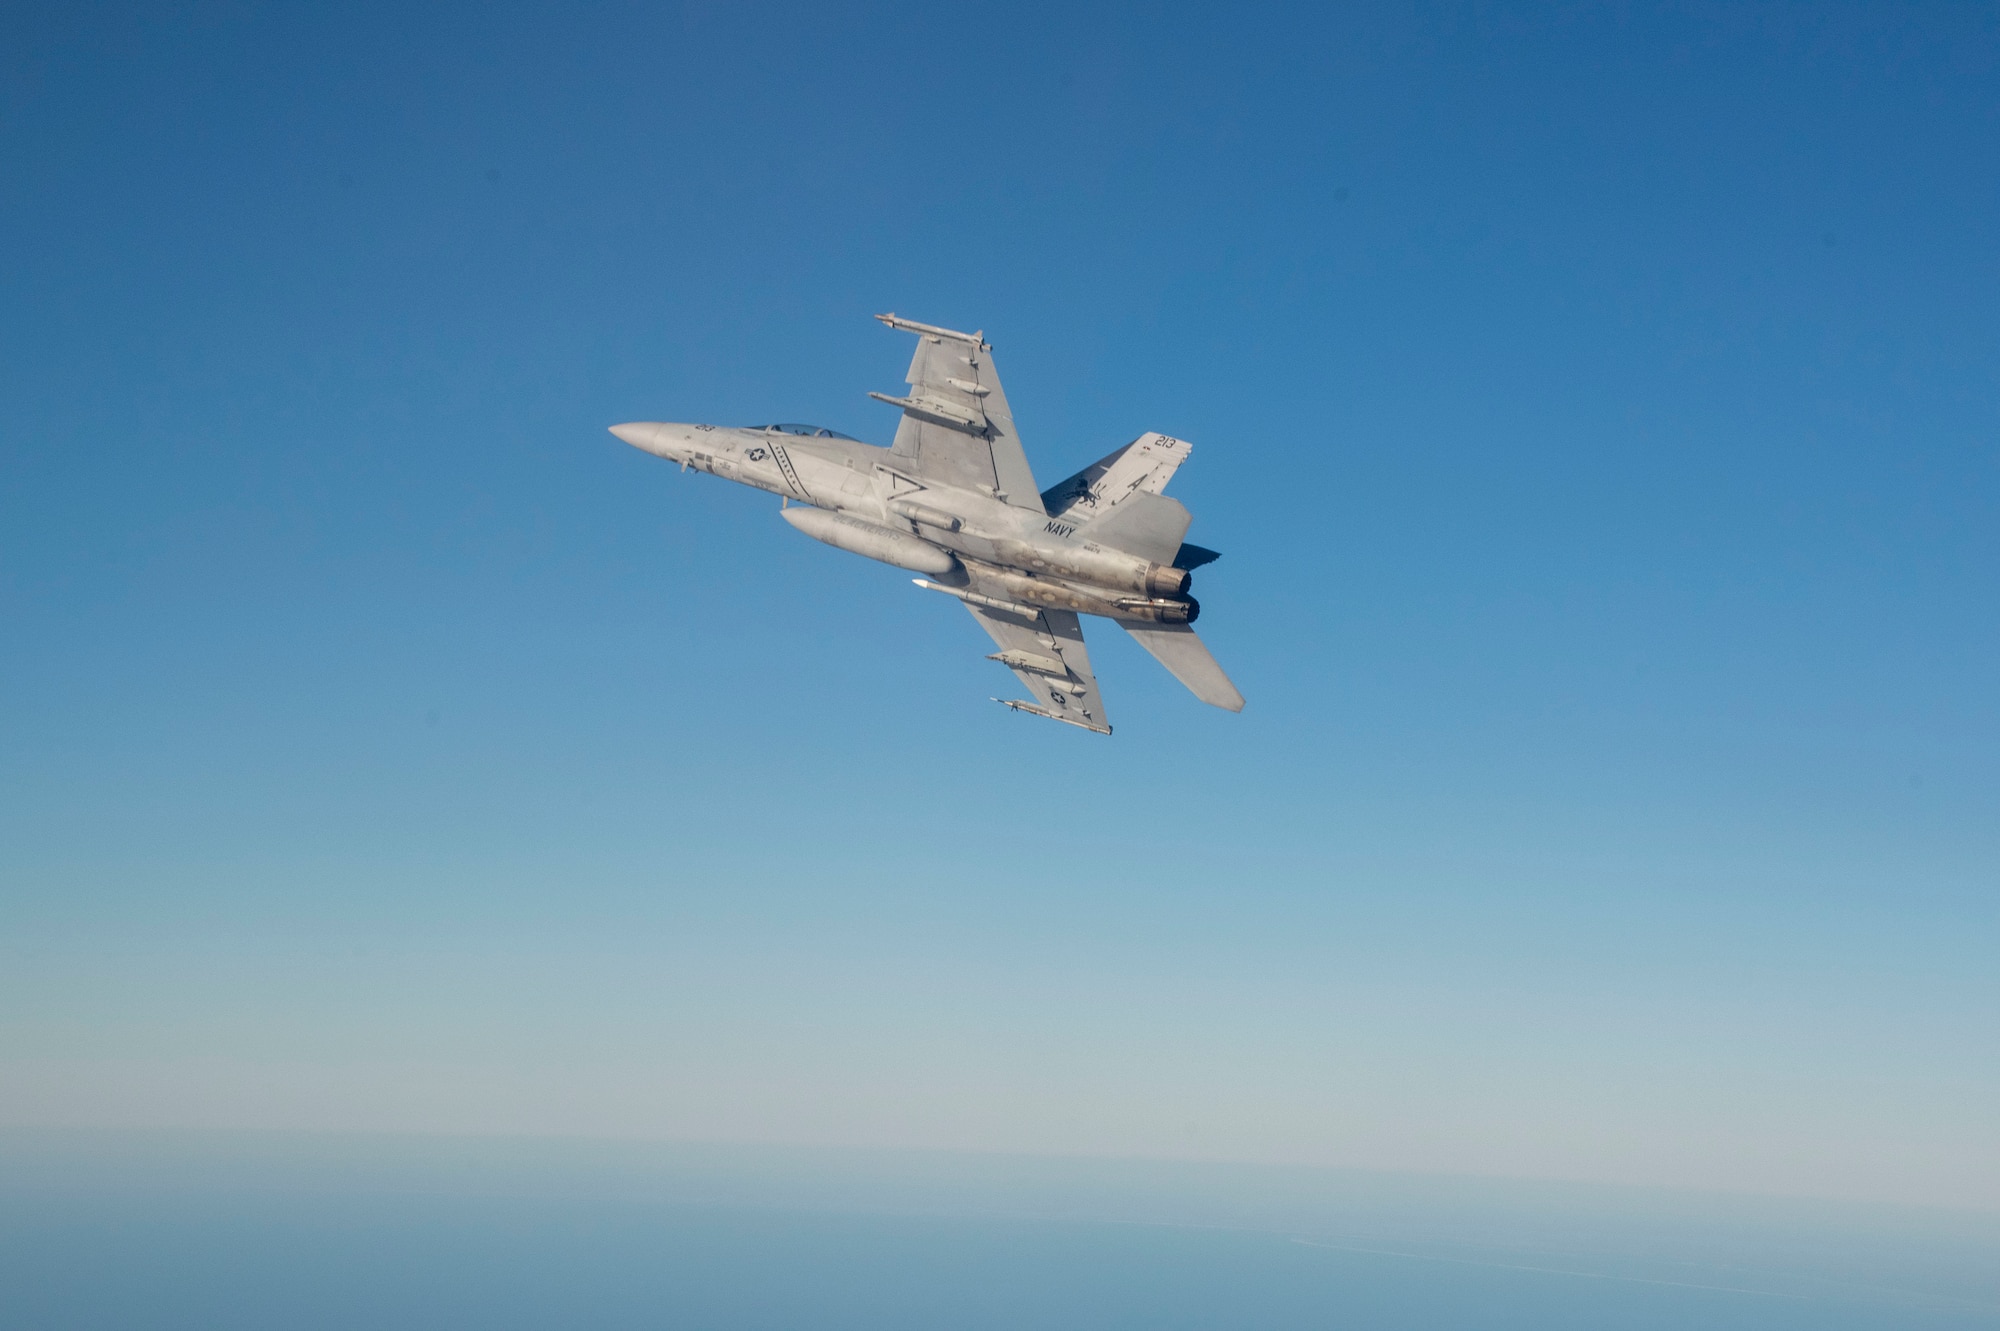 A U.S. Navy F/A-18F Super Hornet assigned to Naval Air Station Oceana, Virginia maneuvers while flying a sortie as part of the 53rd Weapons Evaluation Group’s Weapons System Evaluation Program East 22.02, hosted at Tyndall Air Force Base, Fla., Nov. 16, 2021. WSEP tests and validates the performance of crews, pilots, and their technology to enhance readiness for real-world operations. (U.S. Air Force photo by 1st Lt Lindsey Heflin)